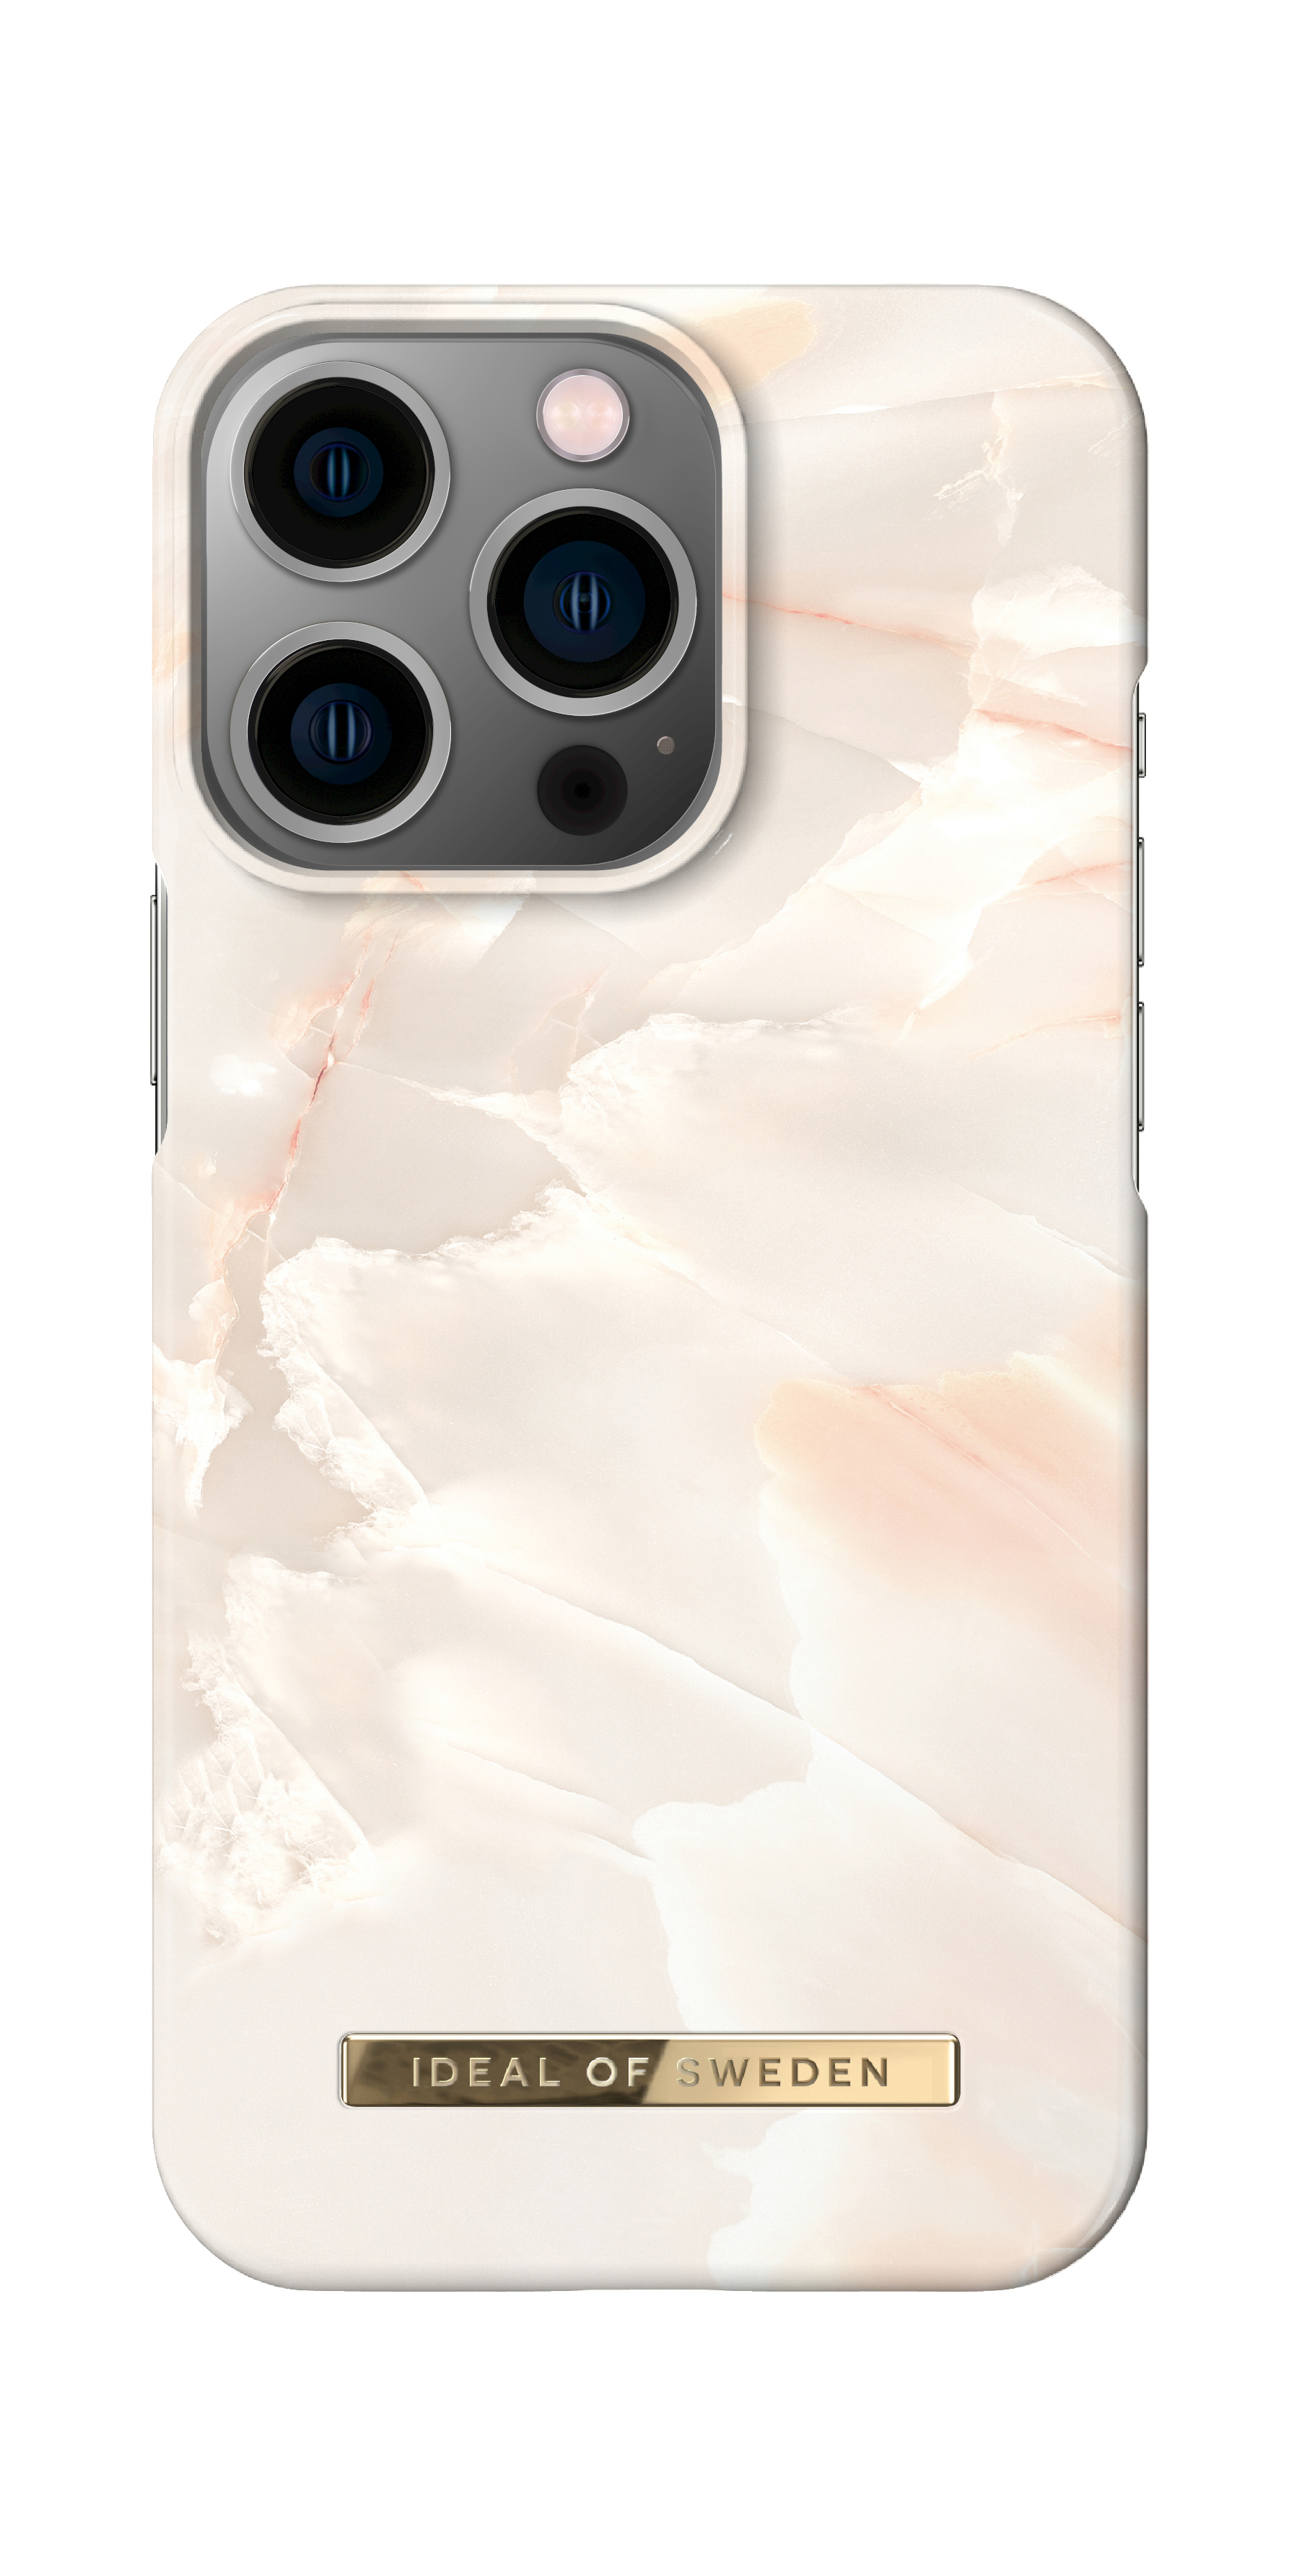 IDEAL OF iPhone Backcover, SWEDEN IDFCSS21-I2161P-257, Rose Marble Pearl Apple, 13Pro